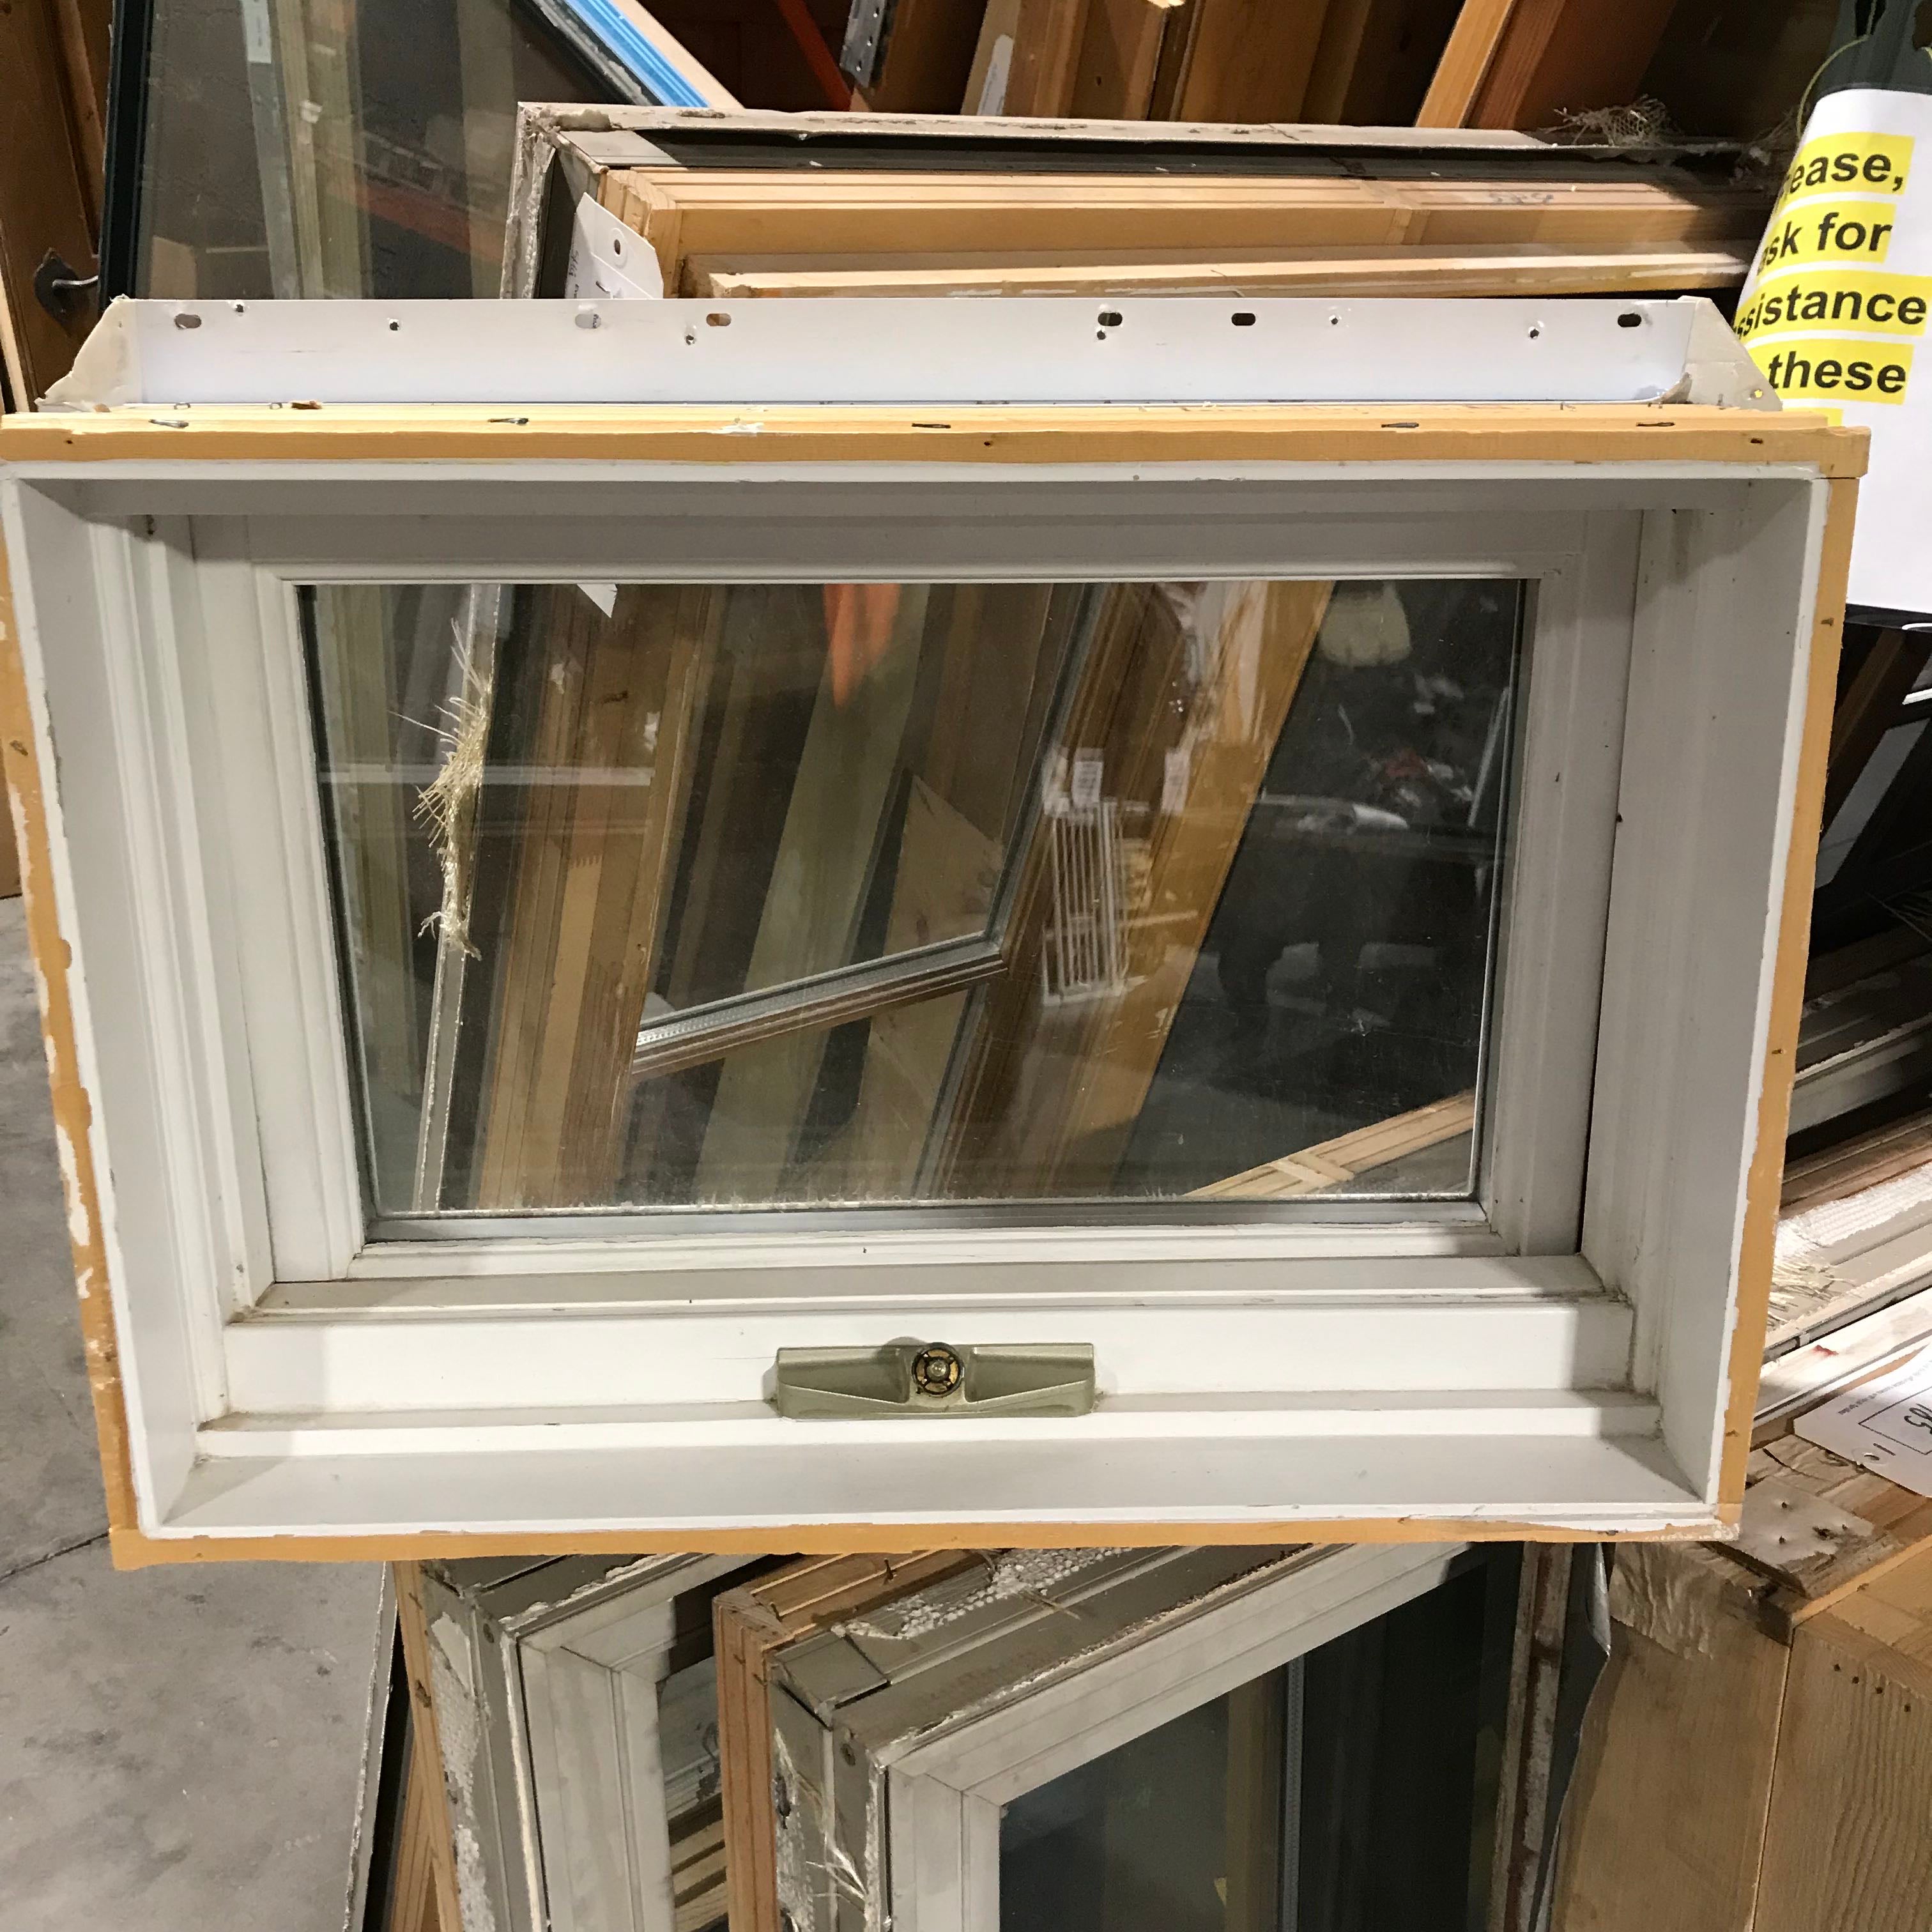 24"x 16"x 7.75" White Metal Clad Painted White Fir Interior Exterior Awning Window